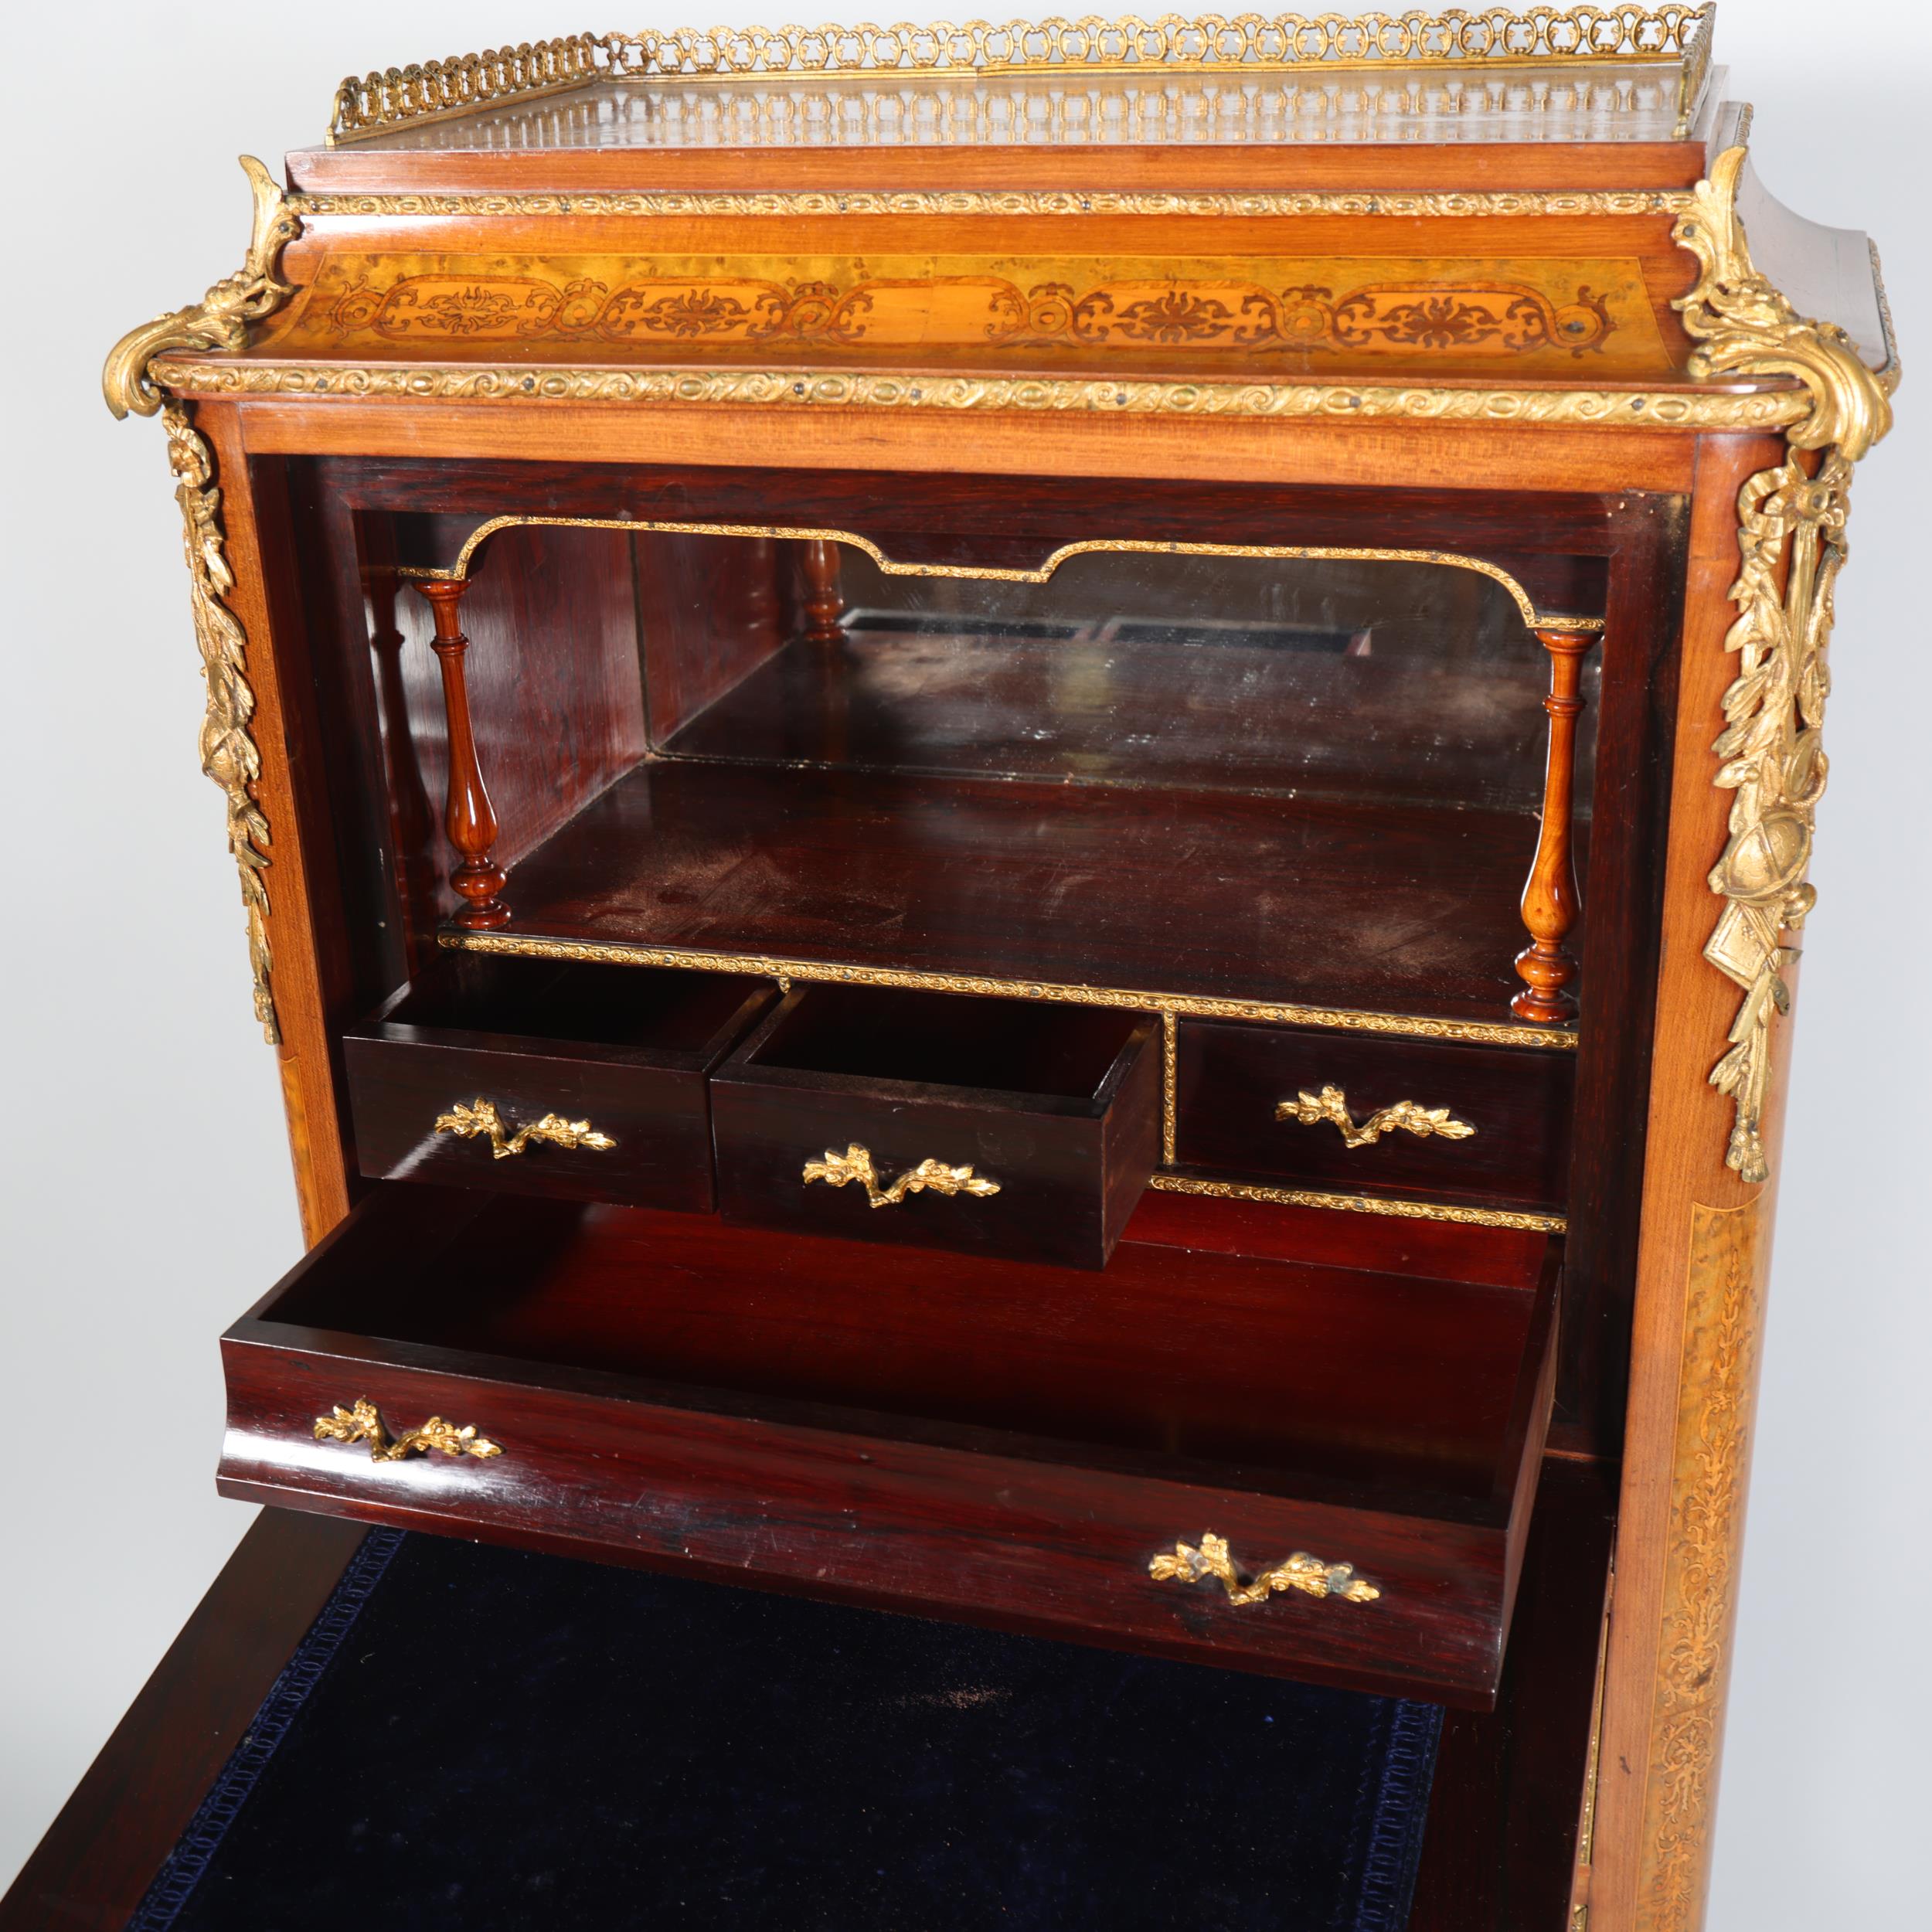 An ornate French mahogany and marquetry inlaid writing cabinet, circa 1900, brass galleried top with - Image 6 of 7